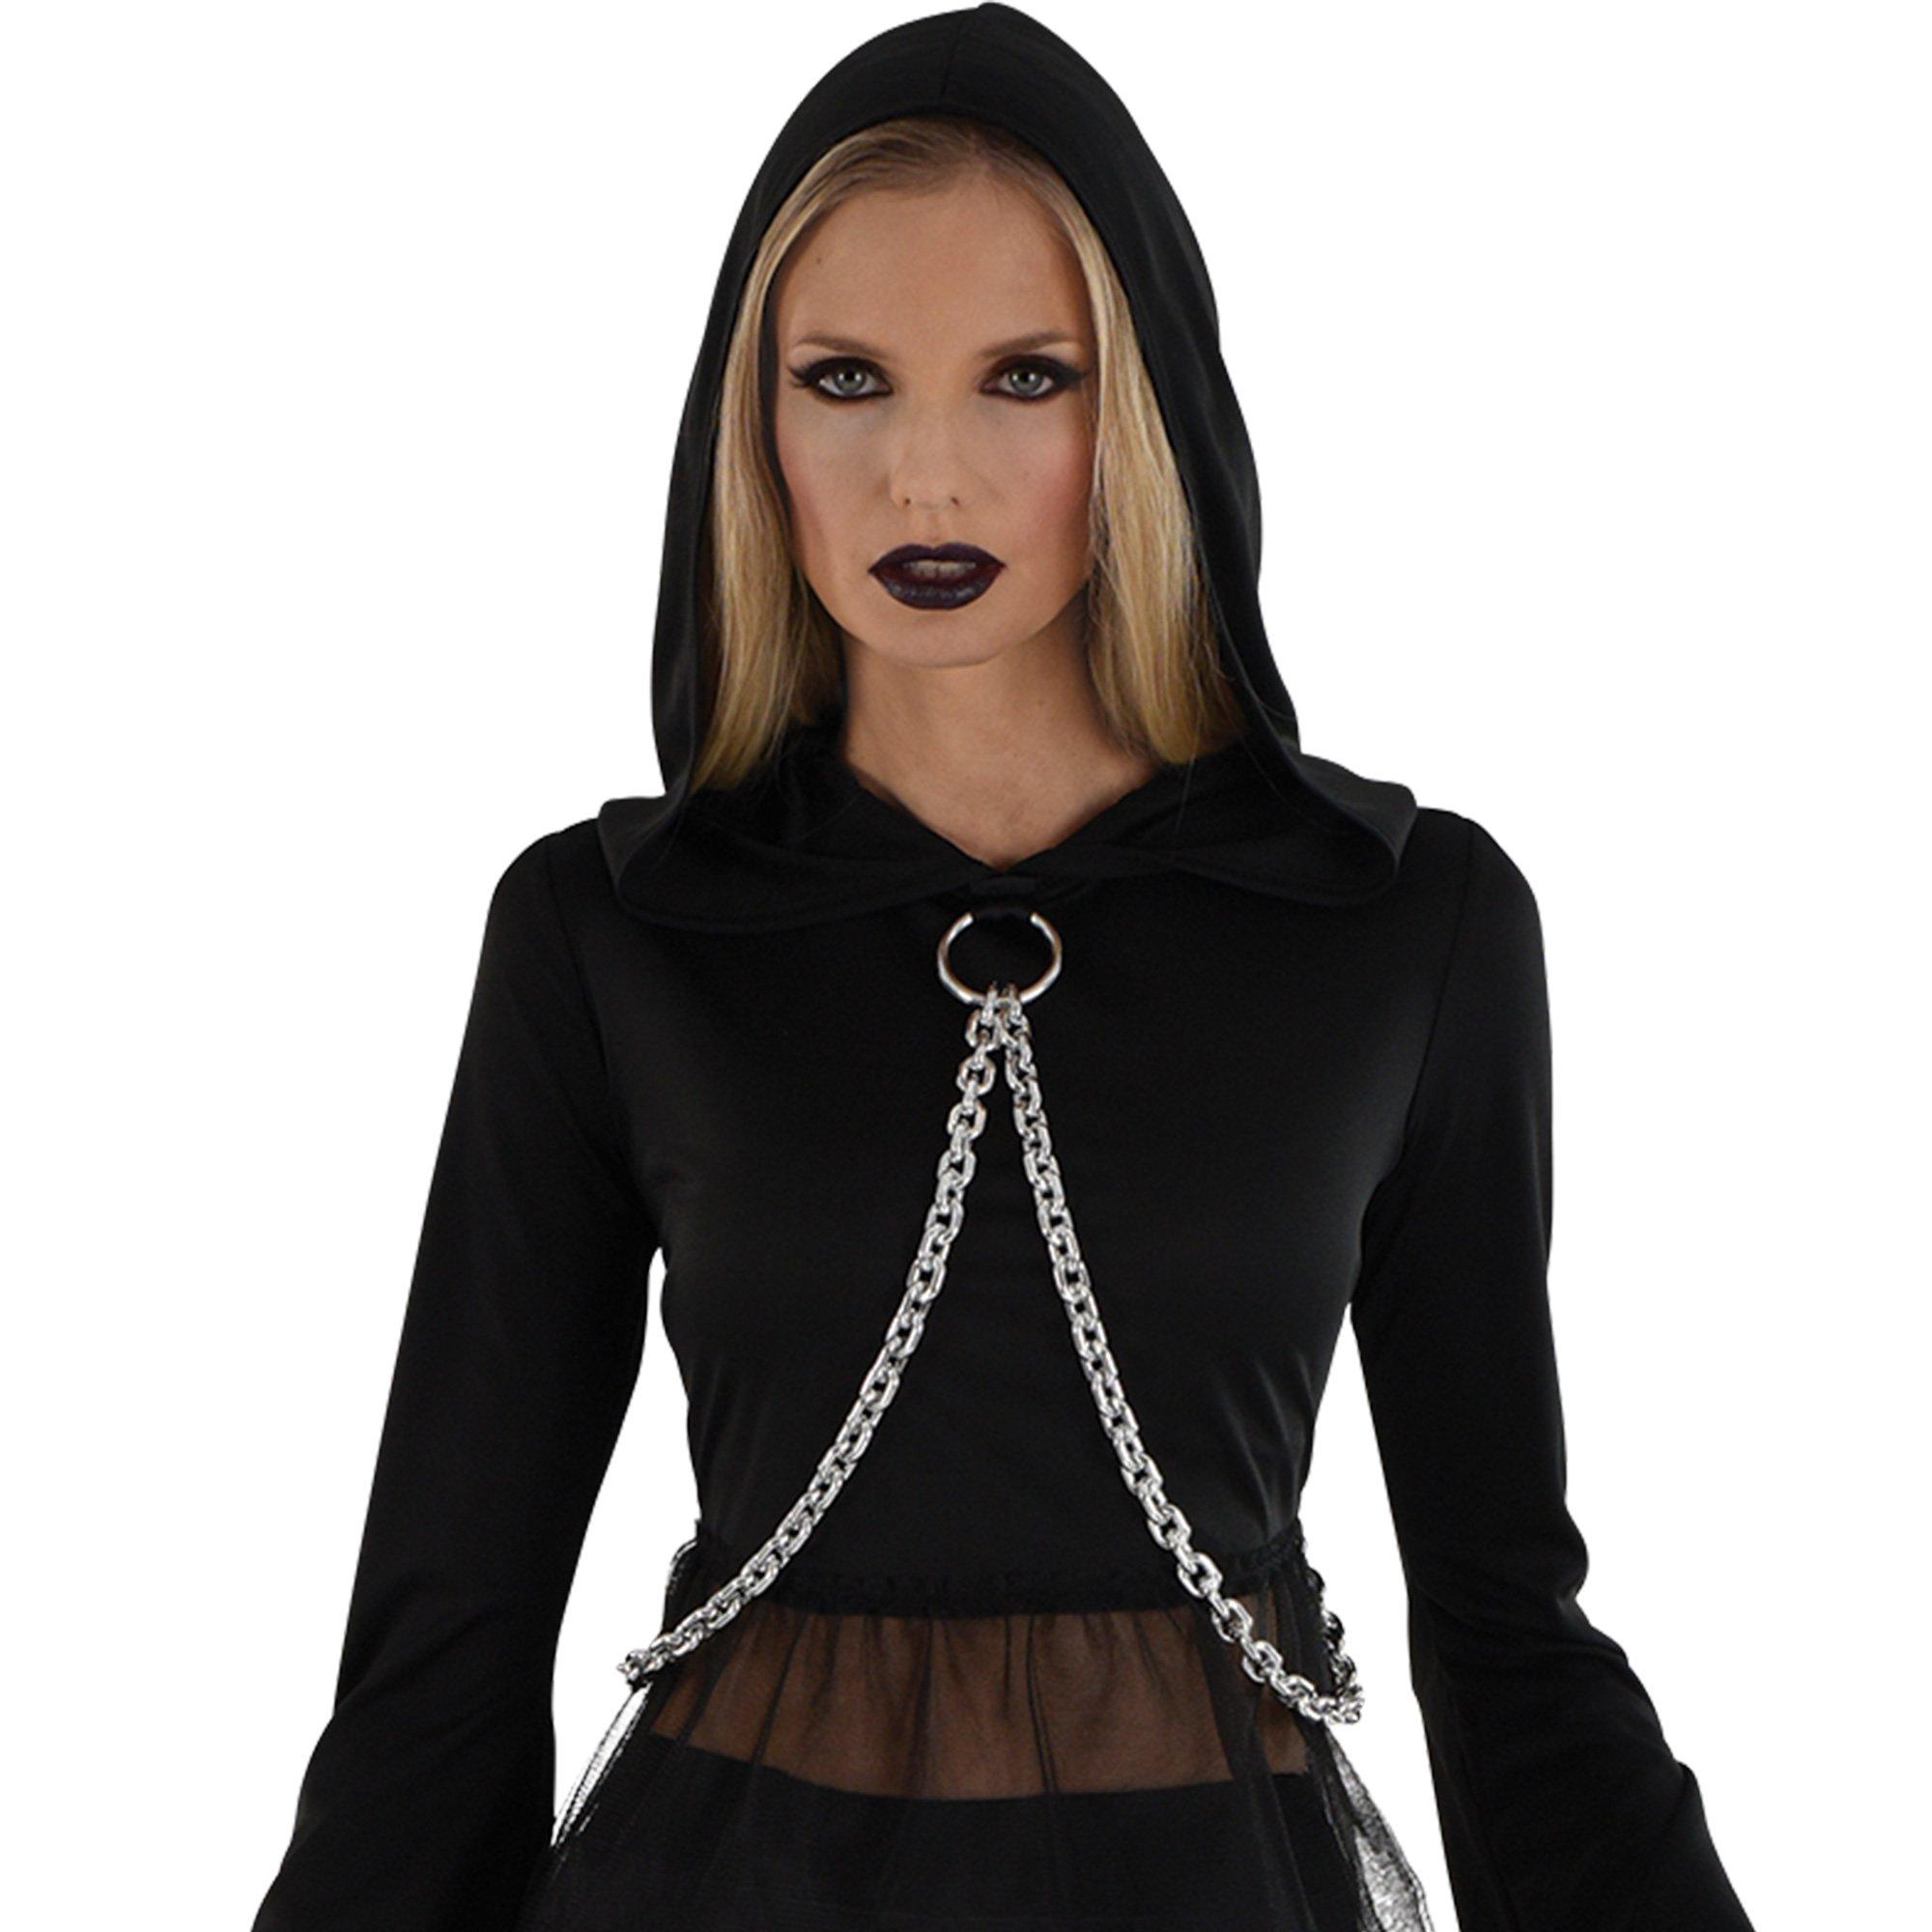 Adult Goth Reaper Costume | Party City